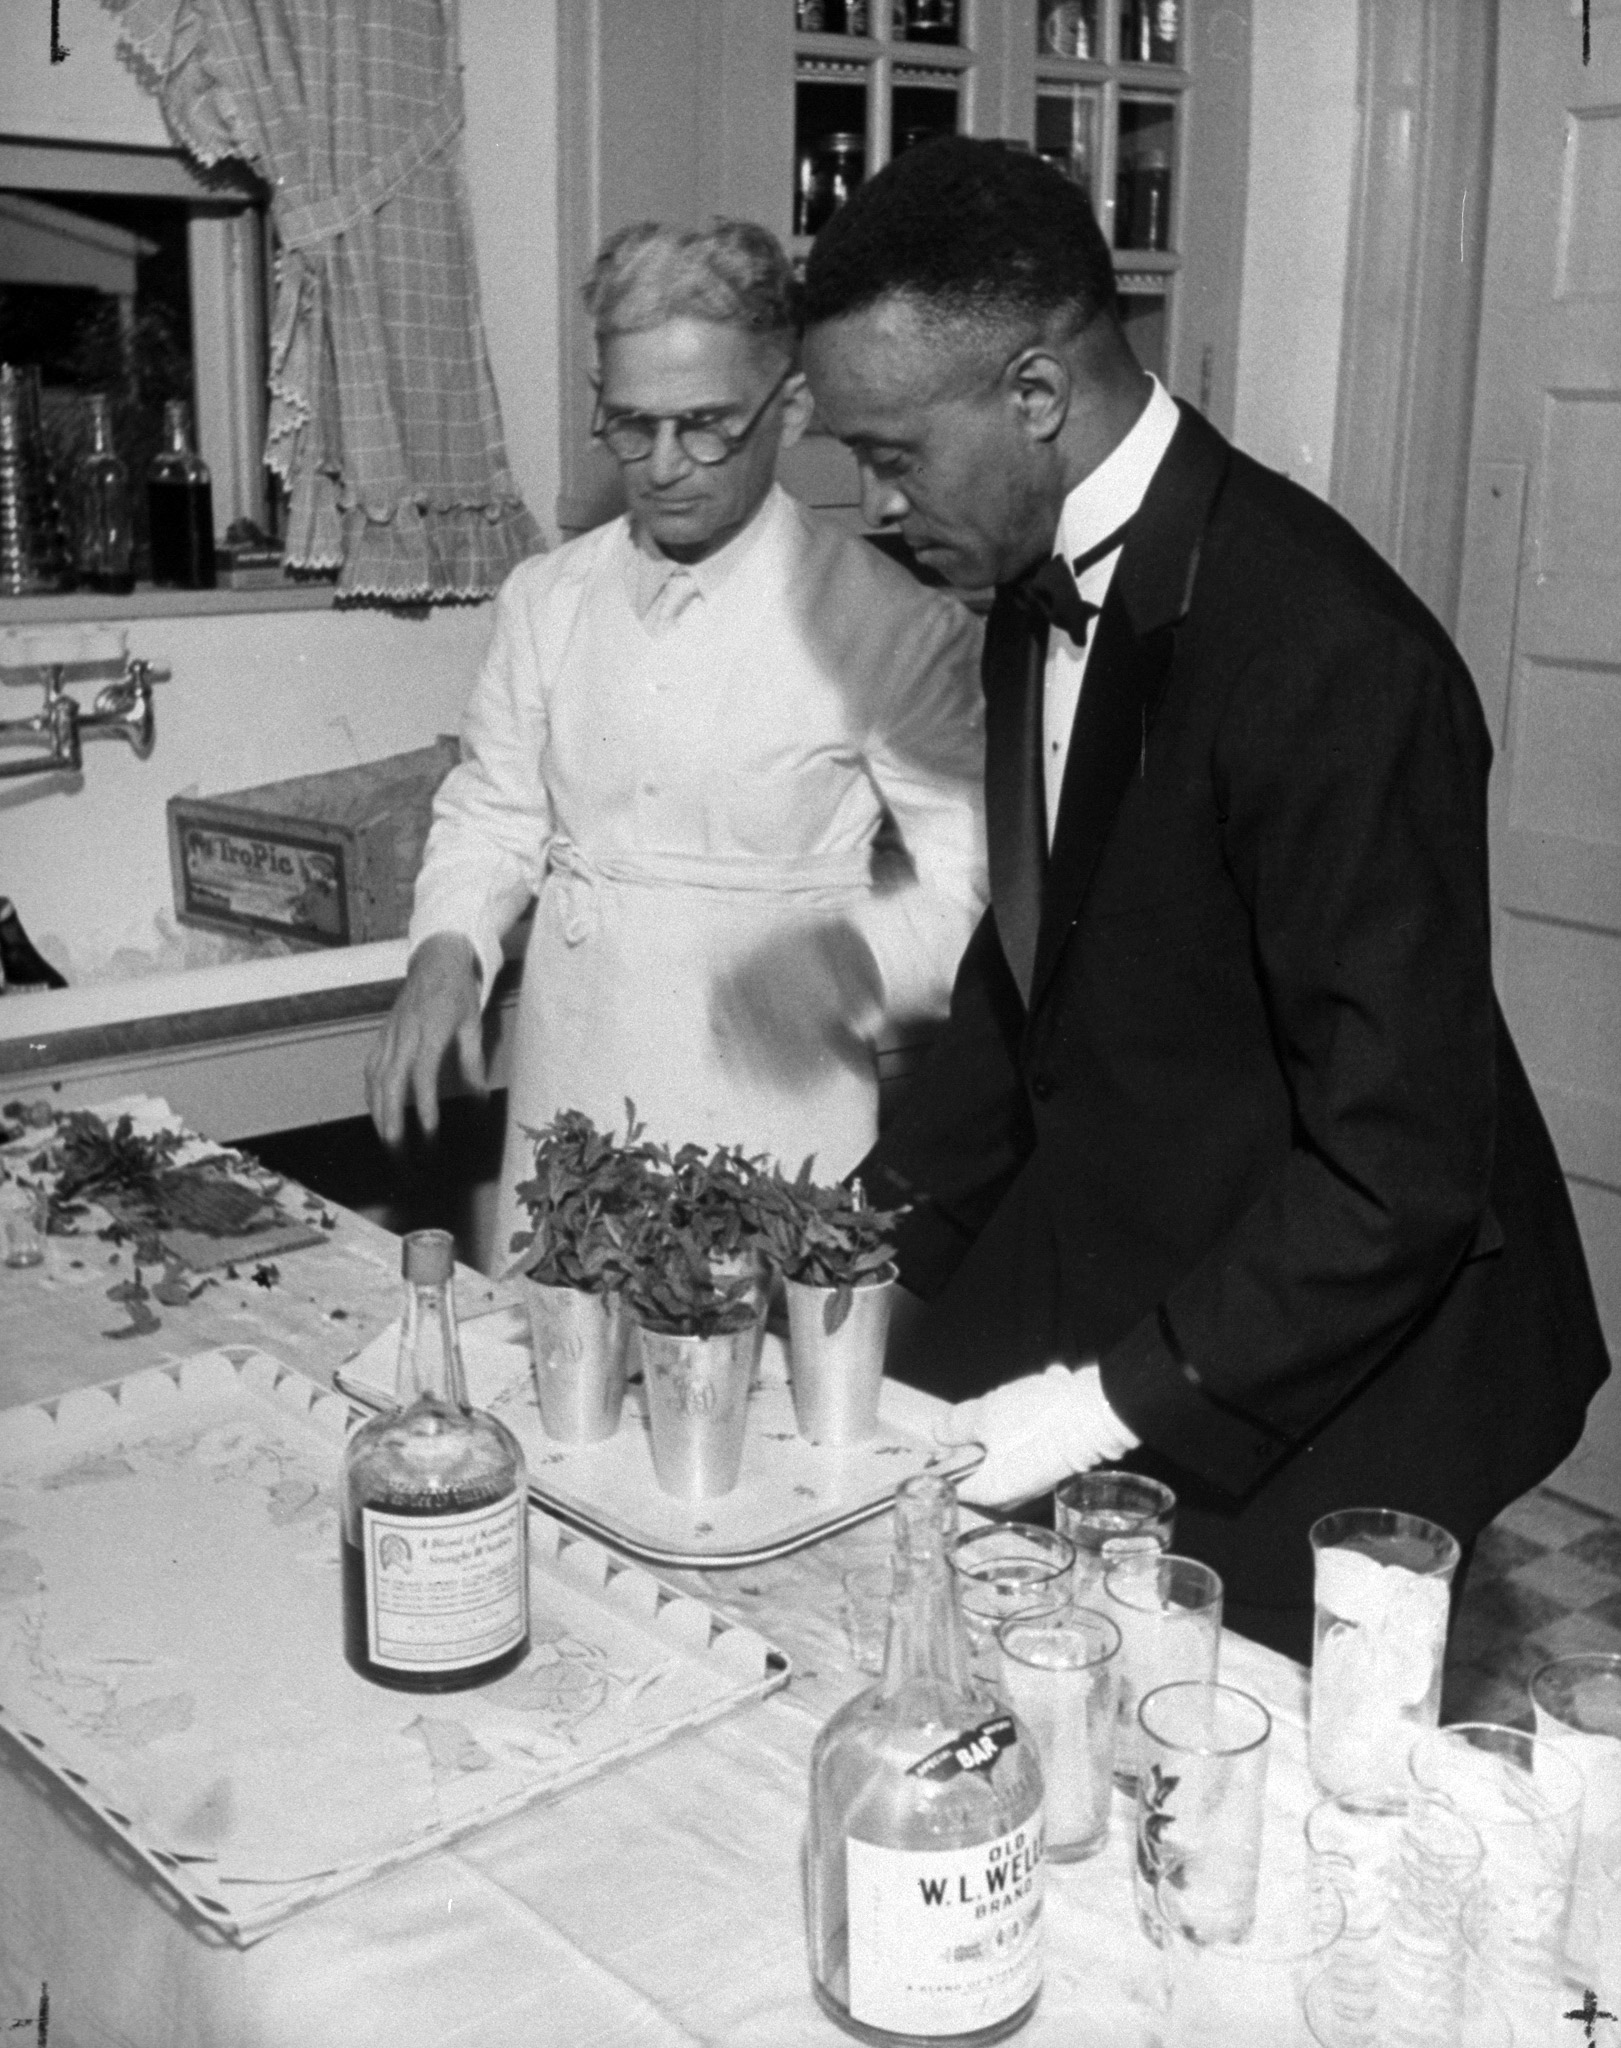 The Van winkle kitchen was a pleasant scene of hospitable preparation as trayful after trayful of silver-mugged mint juleps were sent to the appreciative Derby Week guests.